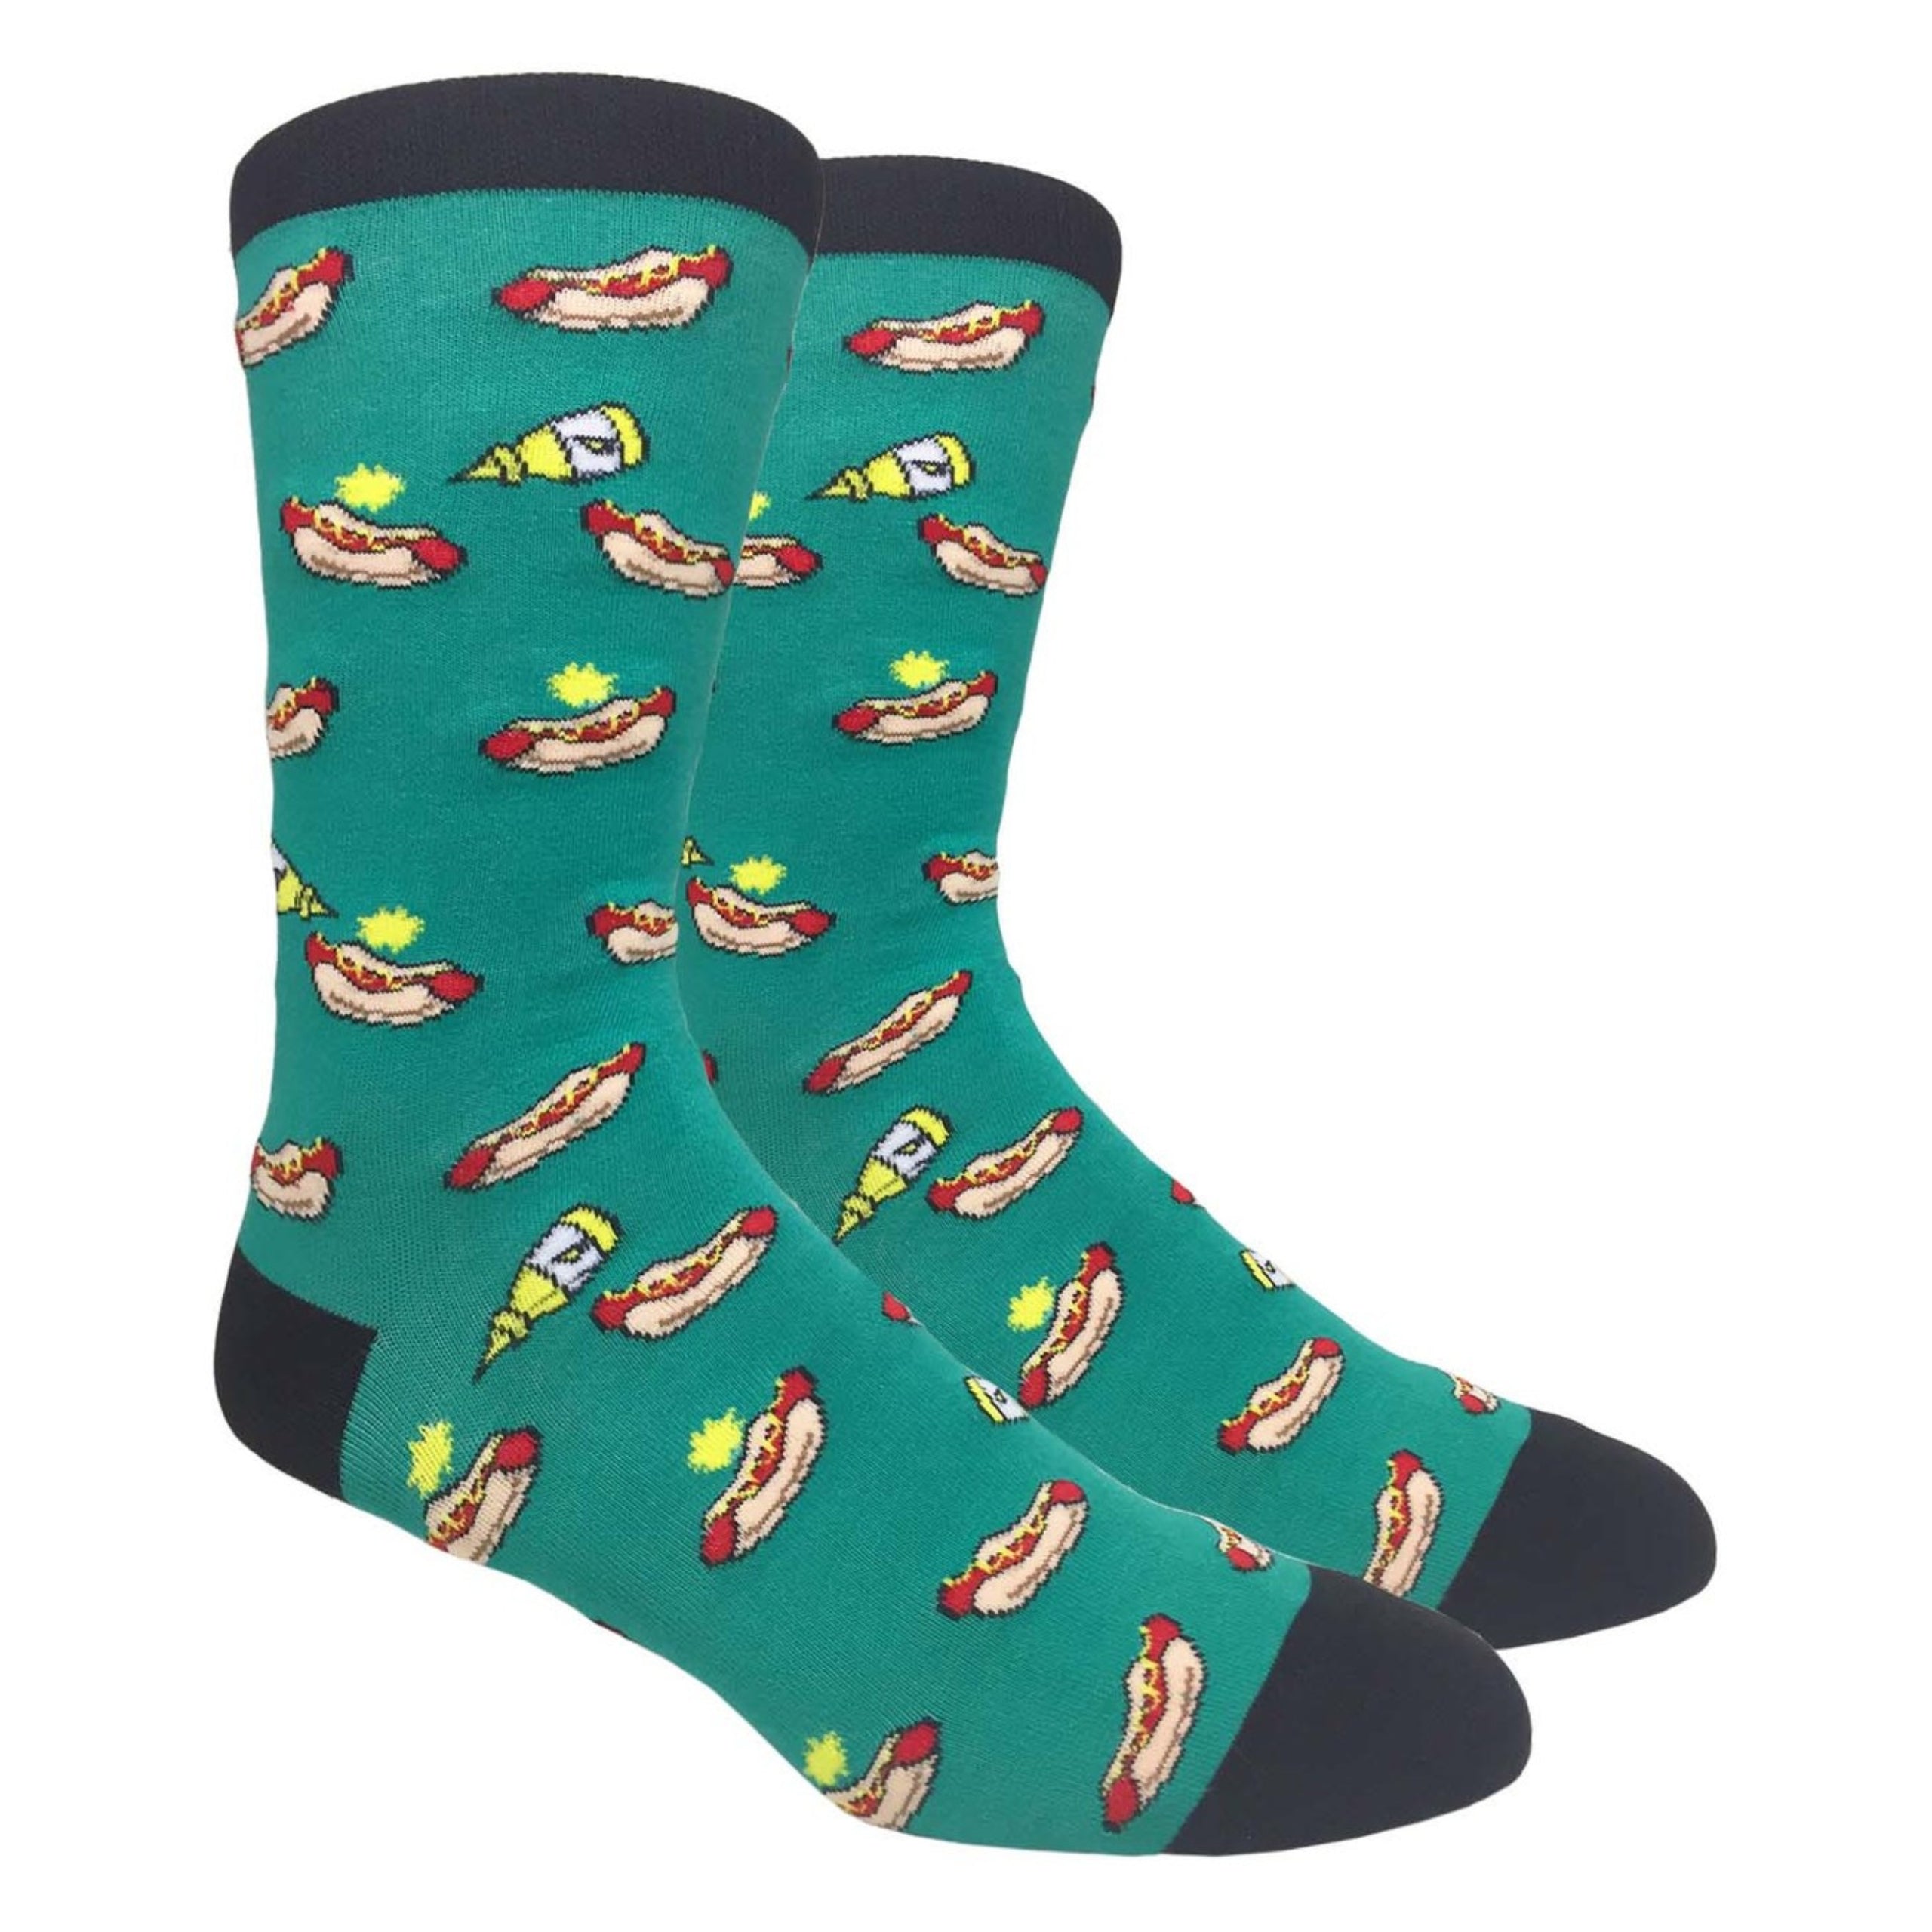 Hot Dogs and Mustard Socks